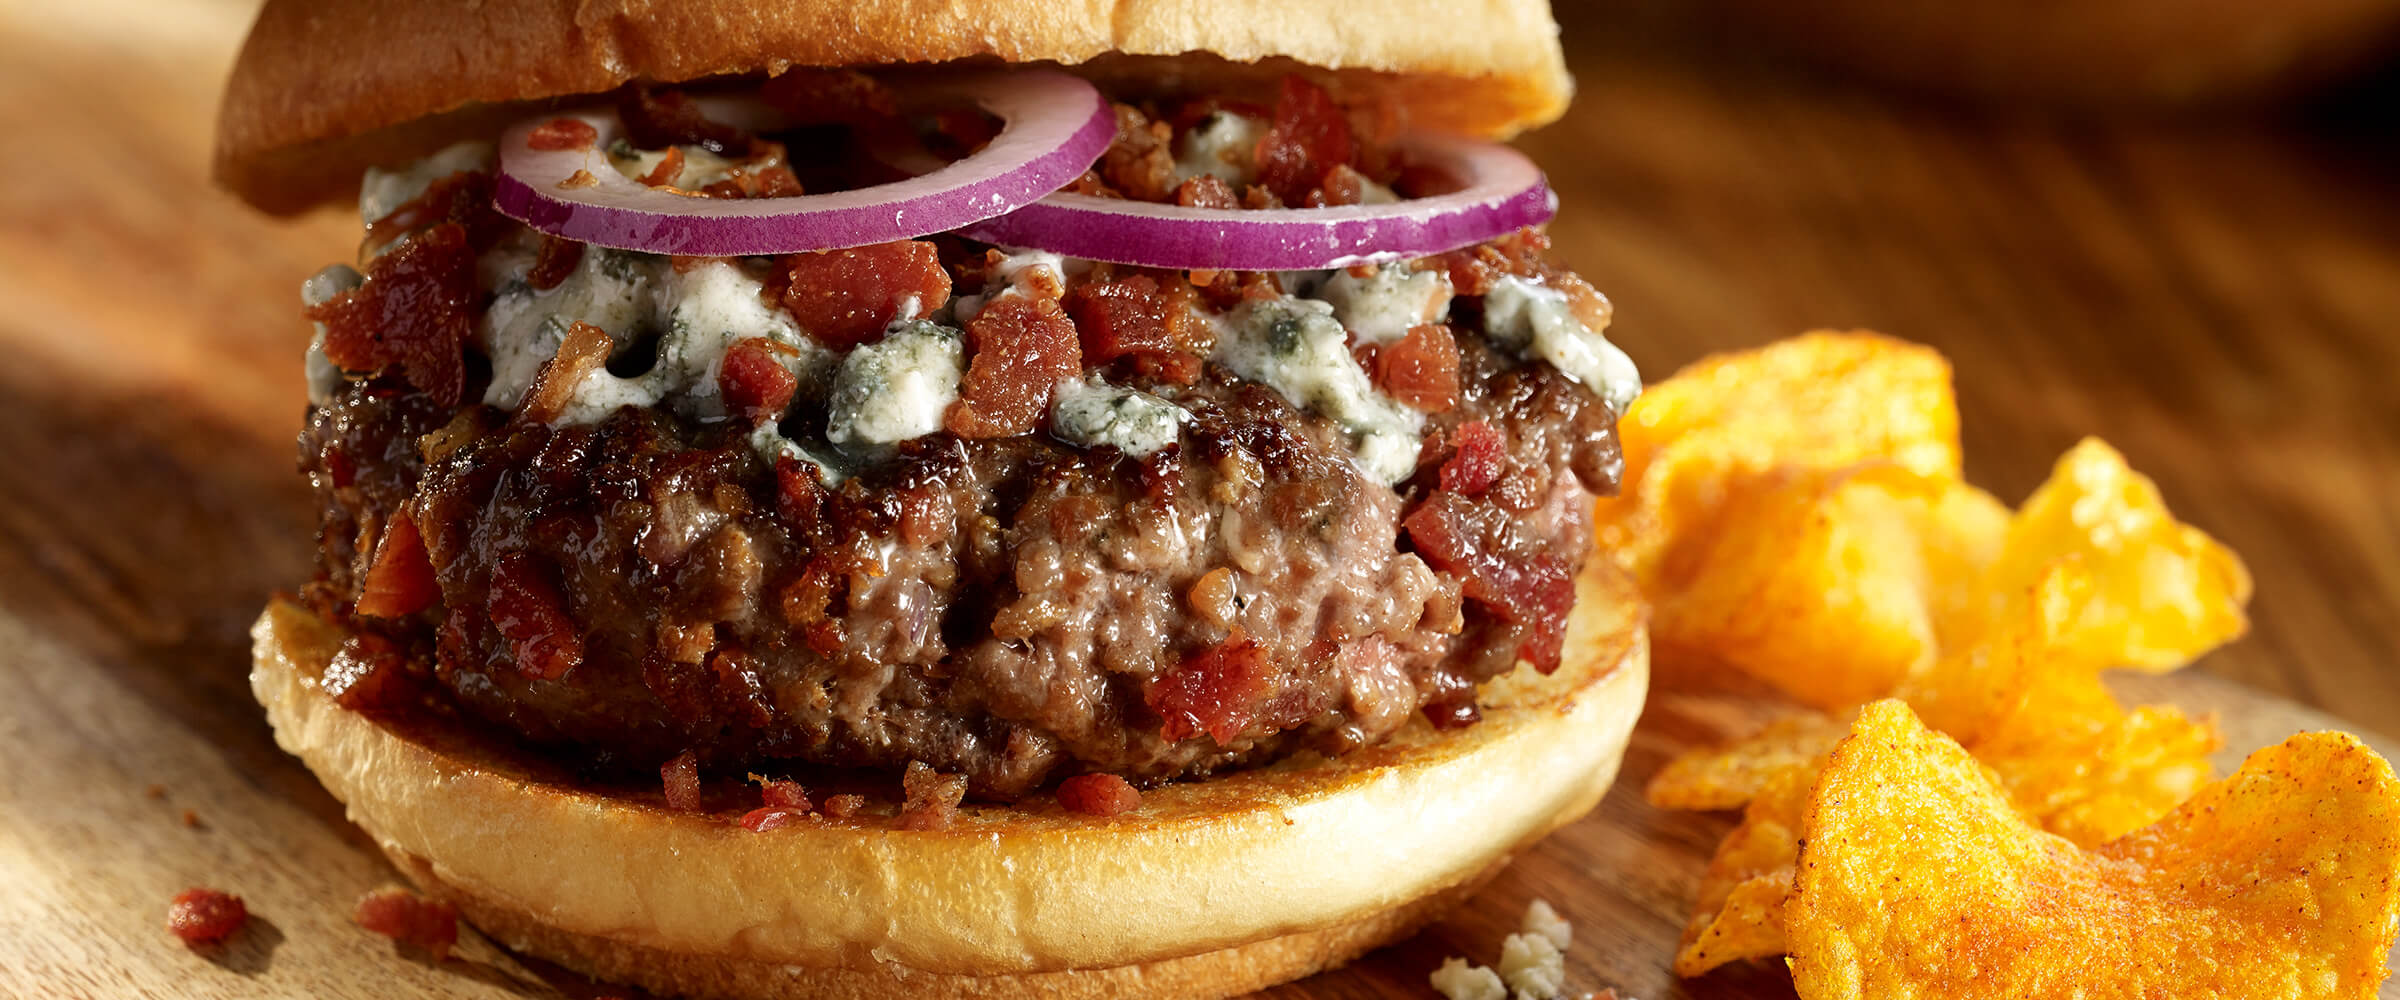 Bacon Blue Cheese Burger - Hormel Foods